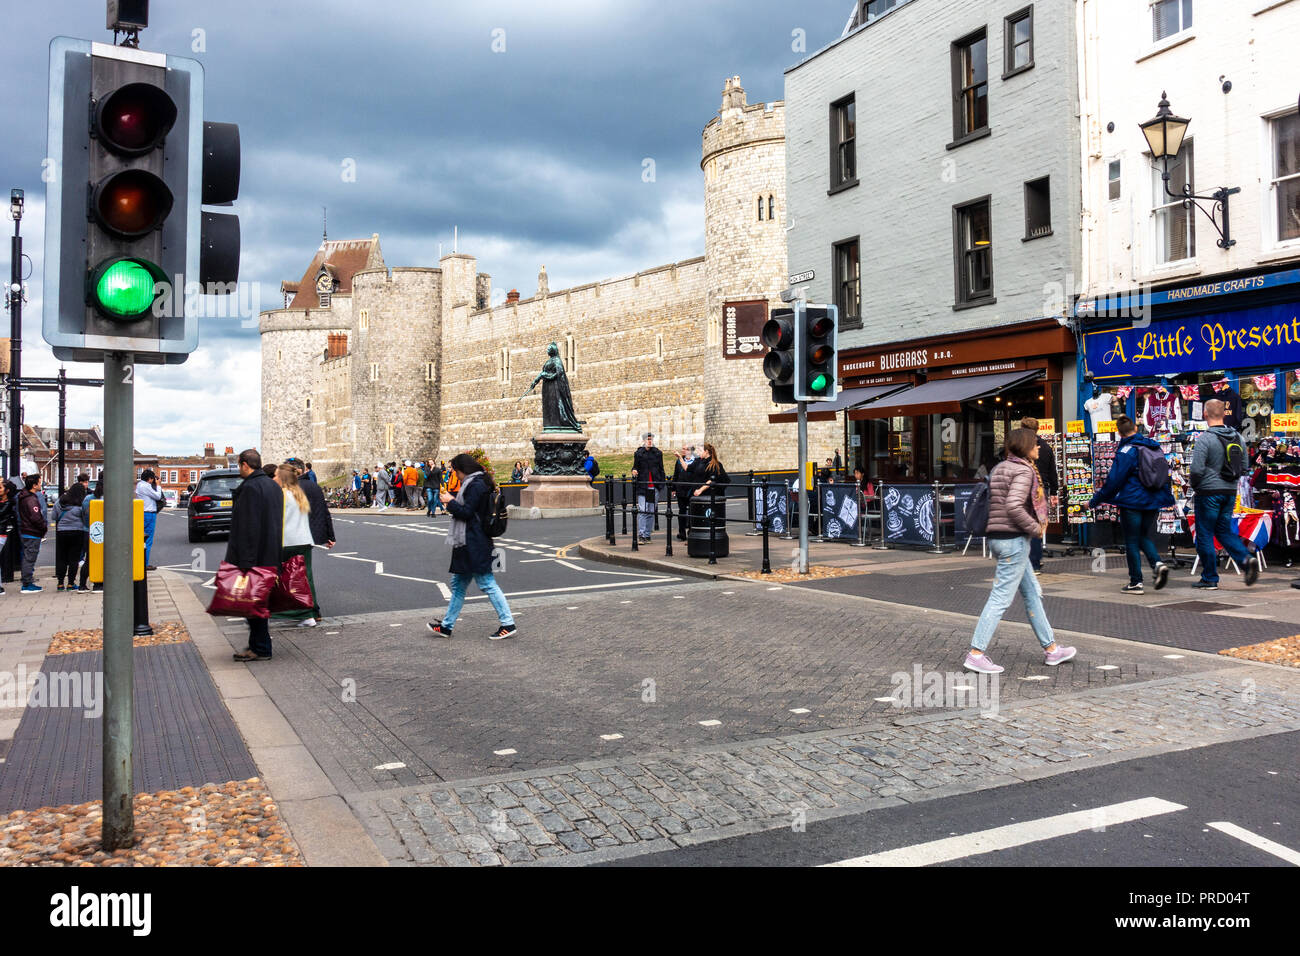 A pedestrian crossing on the High Street near Windsor Castle in Windsor, UK on a cloudy autumn day. Stock Photo